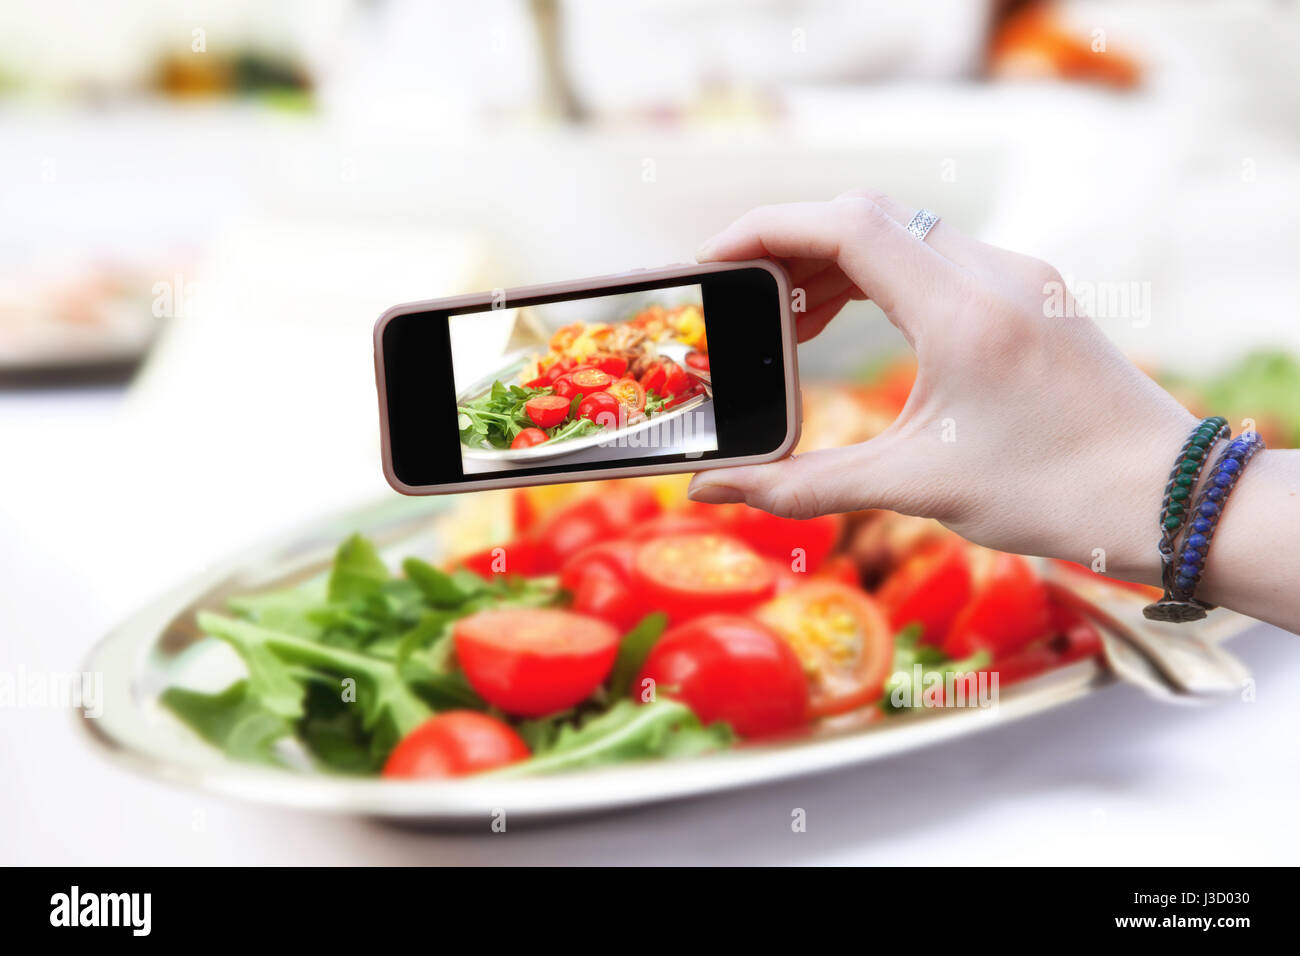 Woman holding a phone and photographed salad of red tomato Stock Photo